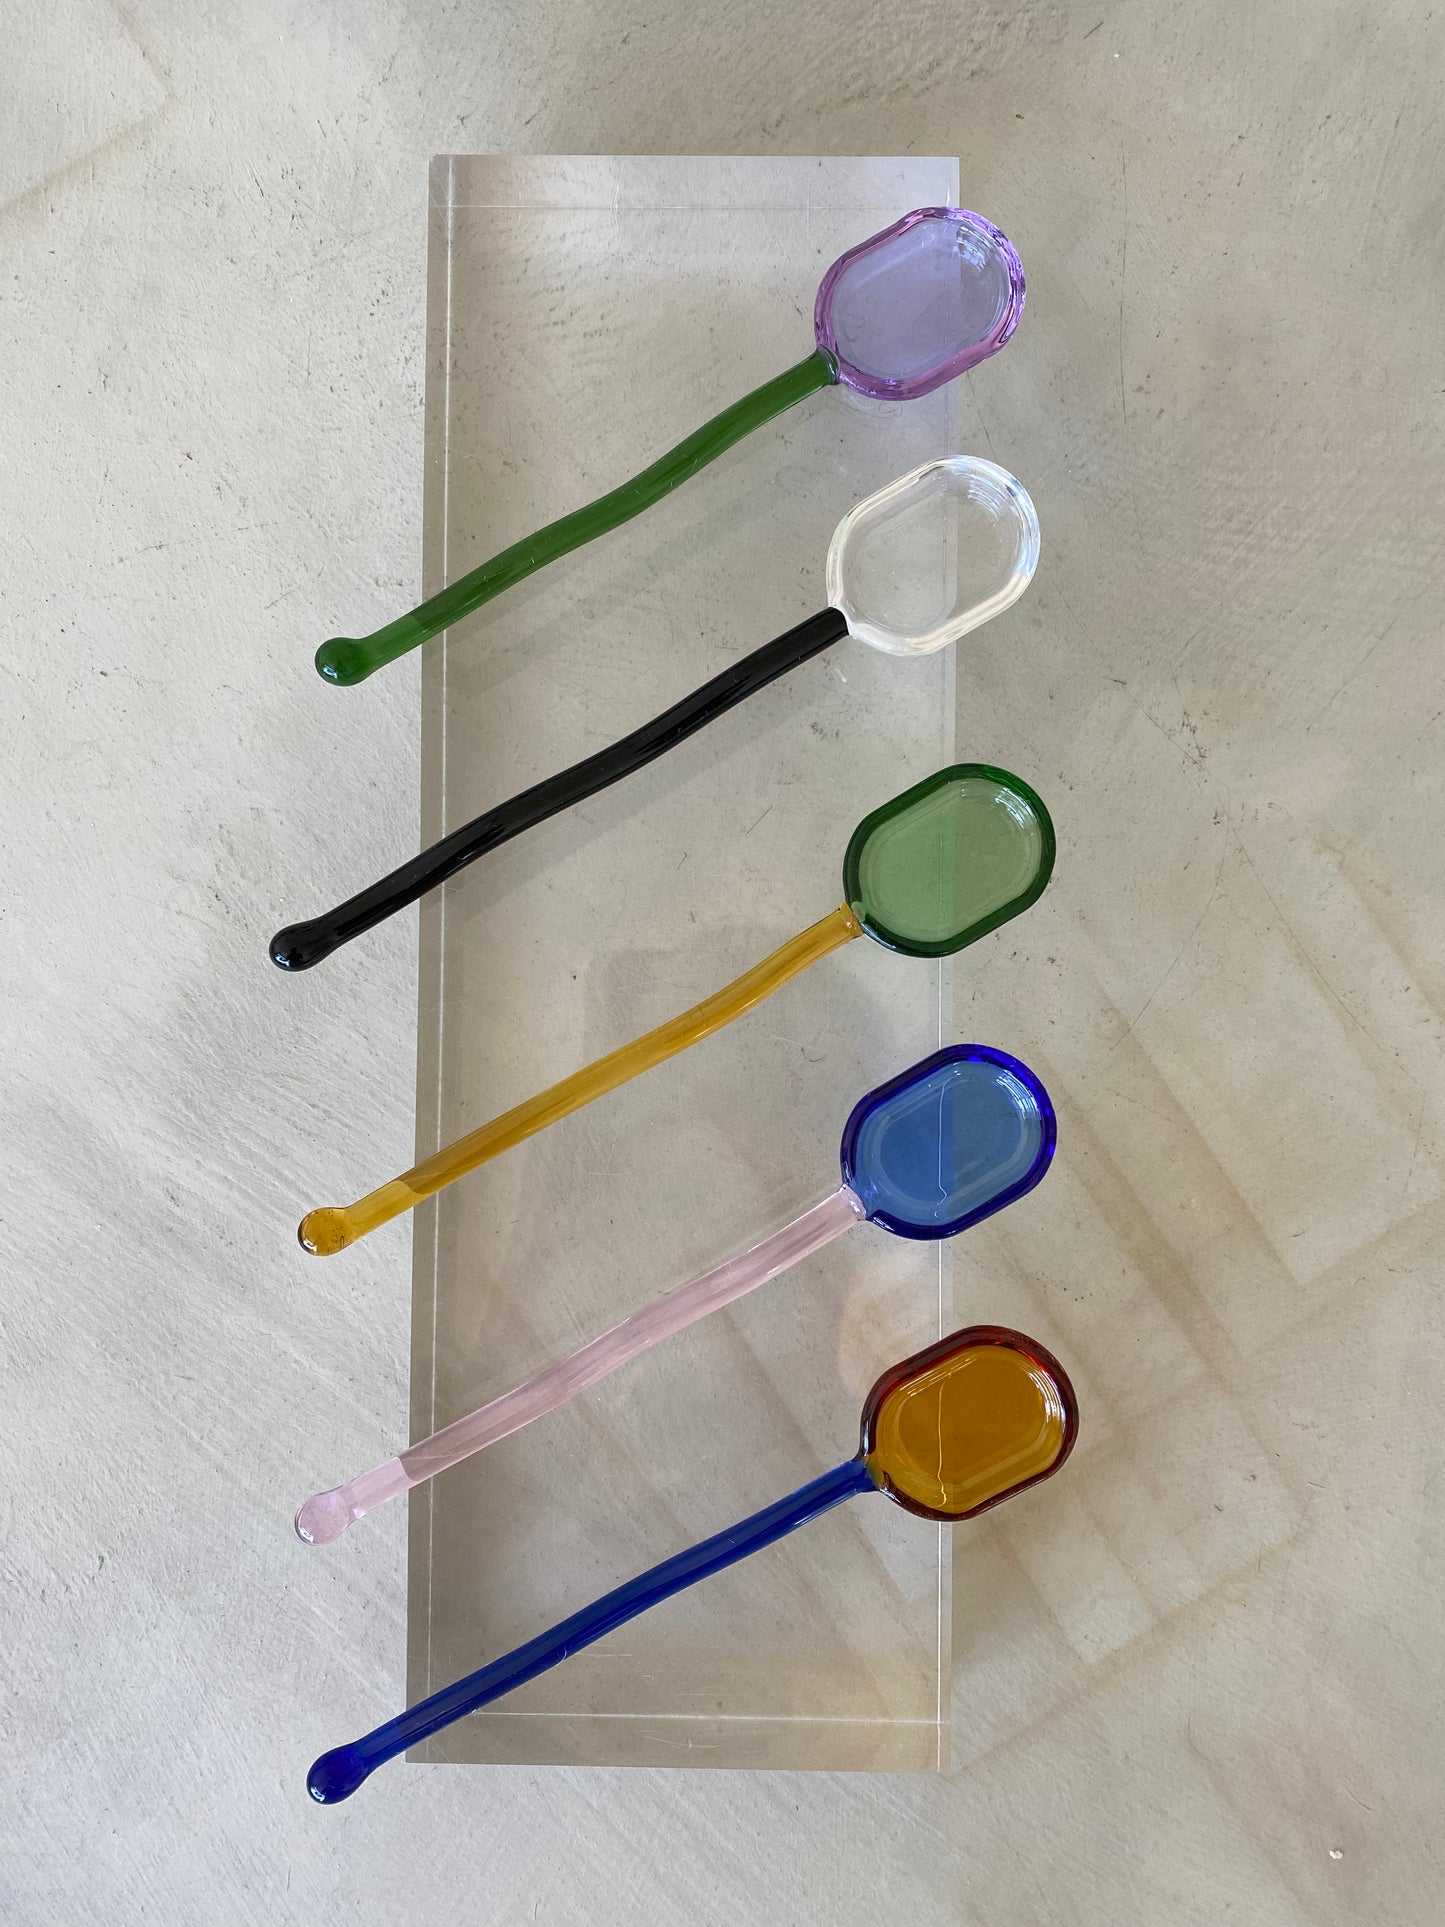 5 glass spoons are arranged on top of a lucite block, from the top to bottom the top spoon has a green handle and a violet bowl, the next one down has a black handle and a clear glass bowl, the middle spoon has a yellow handle and a green bowl, the 4th spoon down from the top is pink with a blue bowl, and the 5th spoon at the bottom of the stack has a cobalt handle and amber bowl